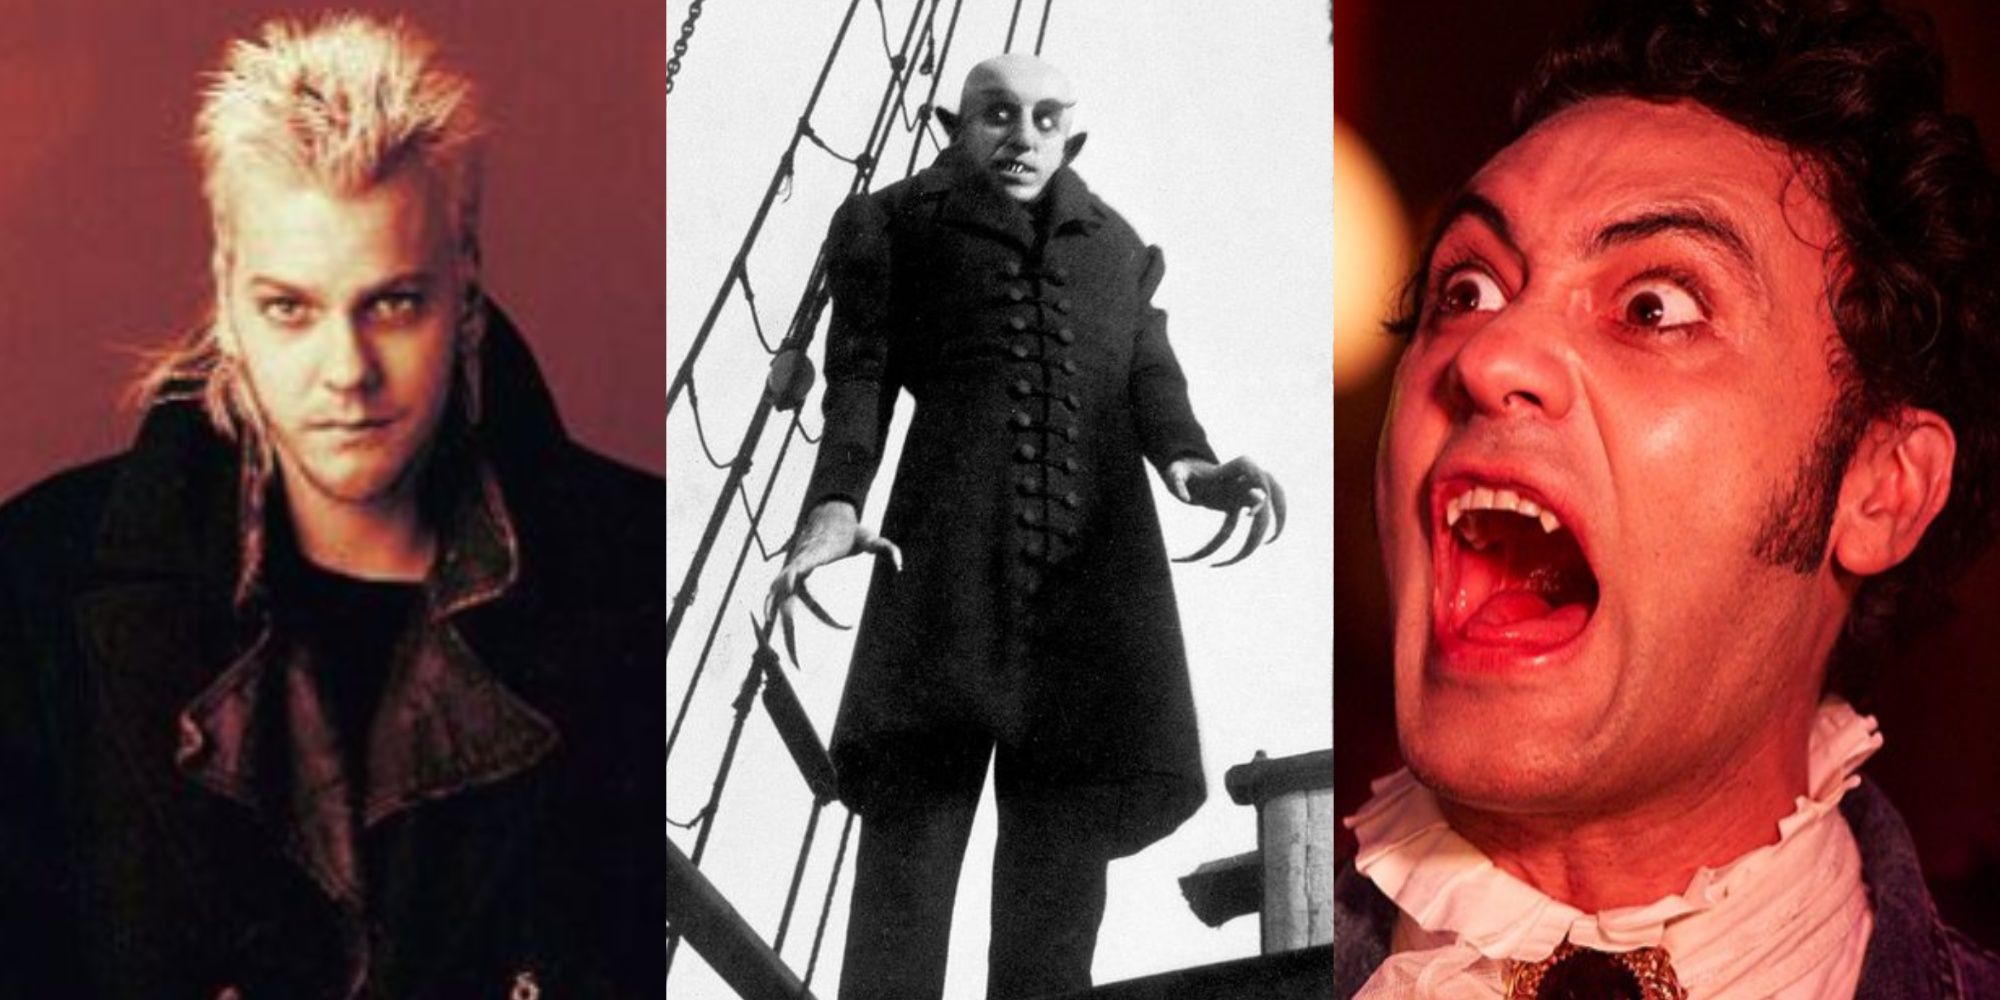 A collage of images from The Lost Boys, Nosferatu and What We Do In The Shadows.